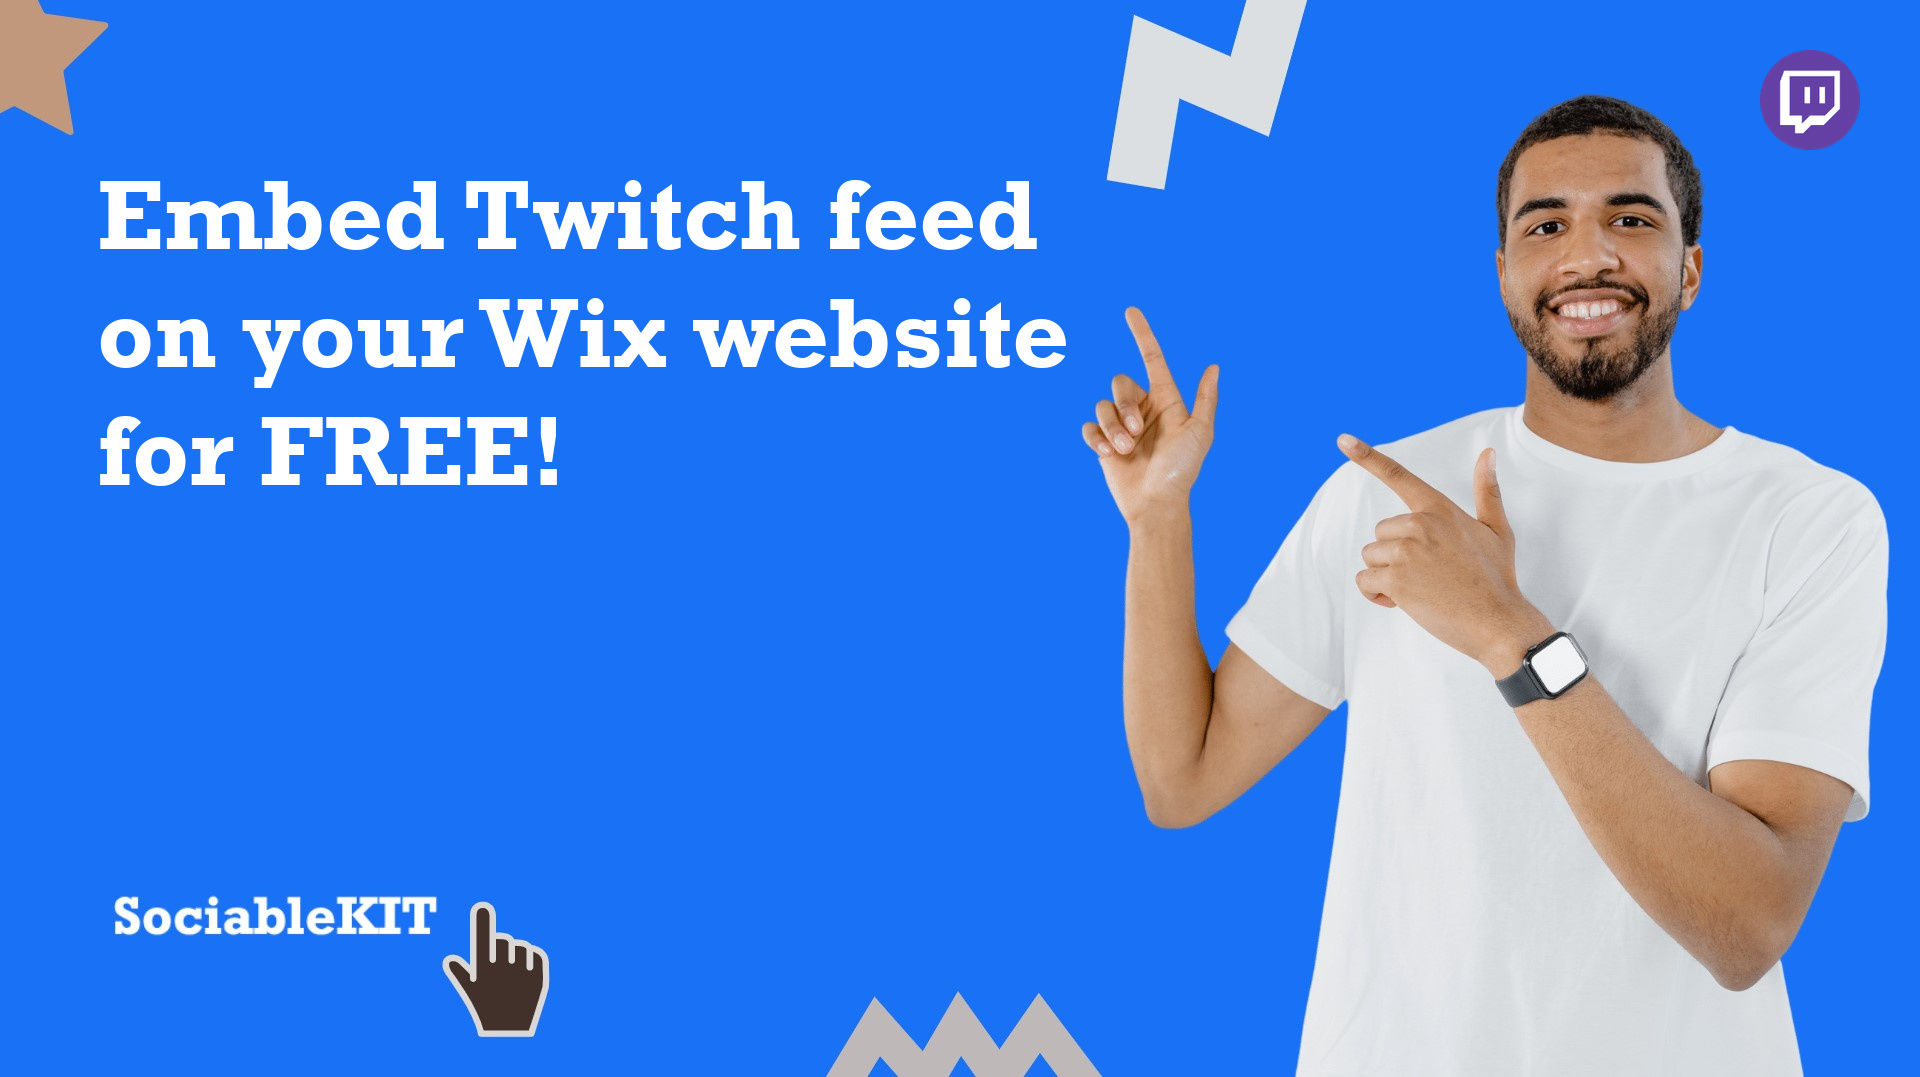 How to embed Twitch feed on your Wix website for FREE?